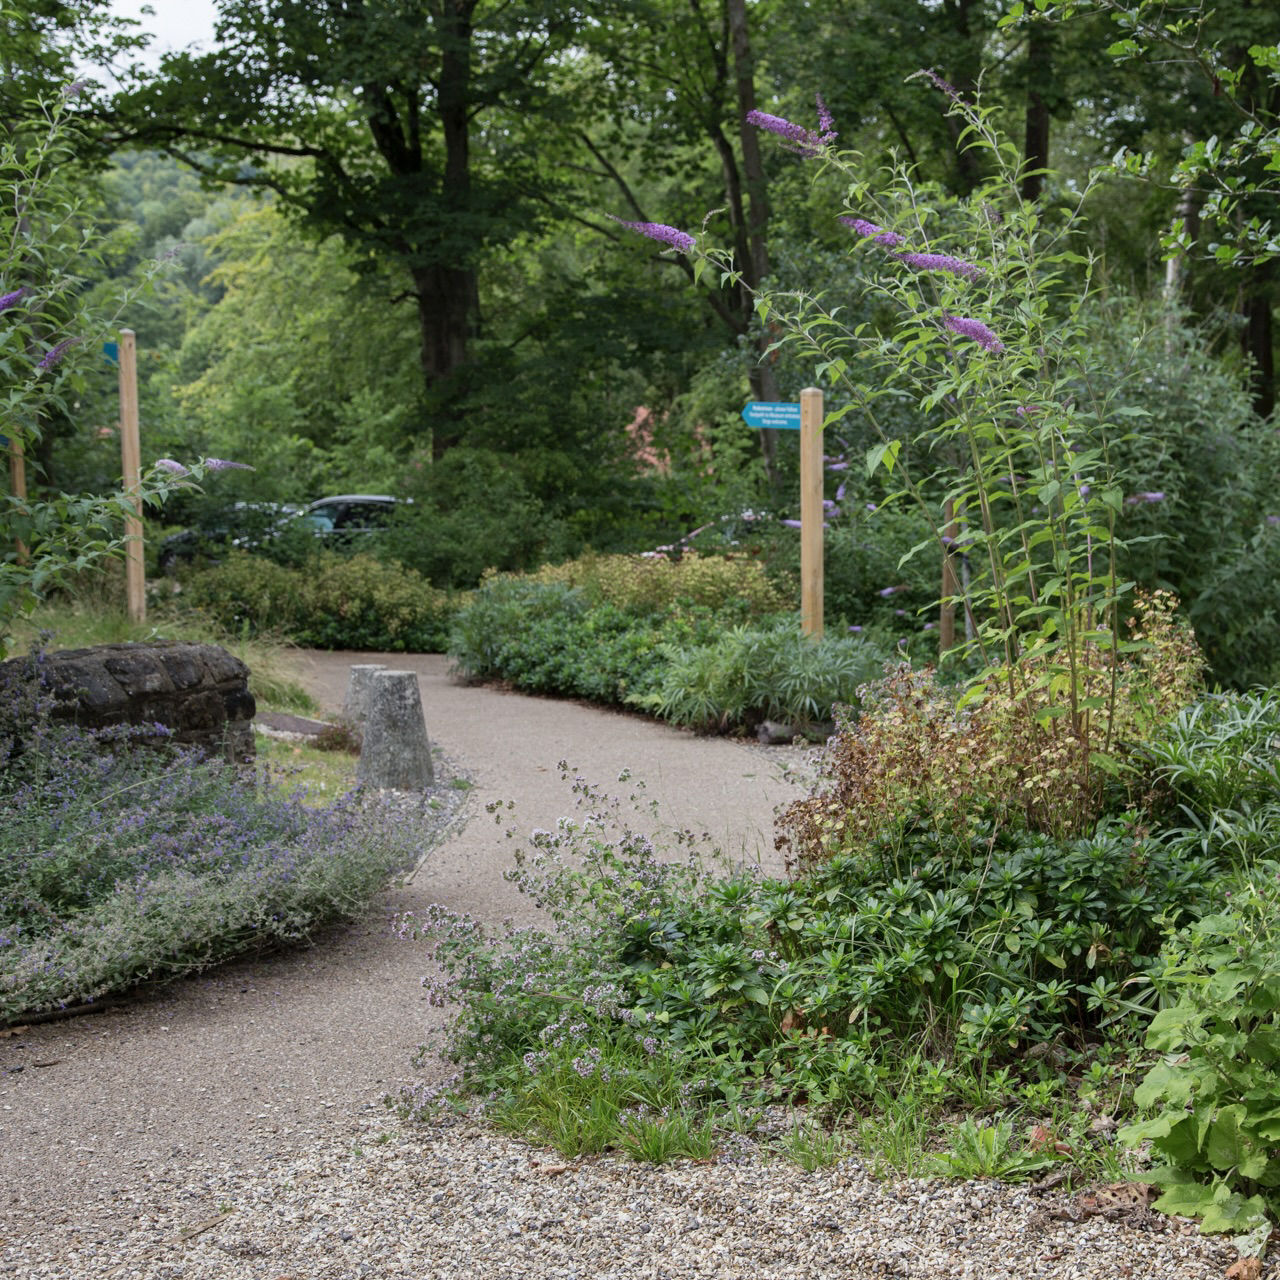 Woodland planting with resin bound gravel path